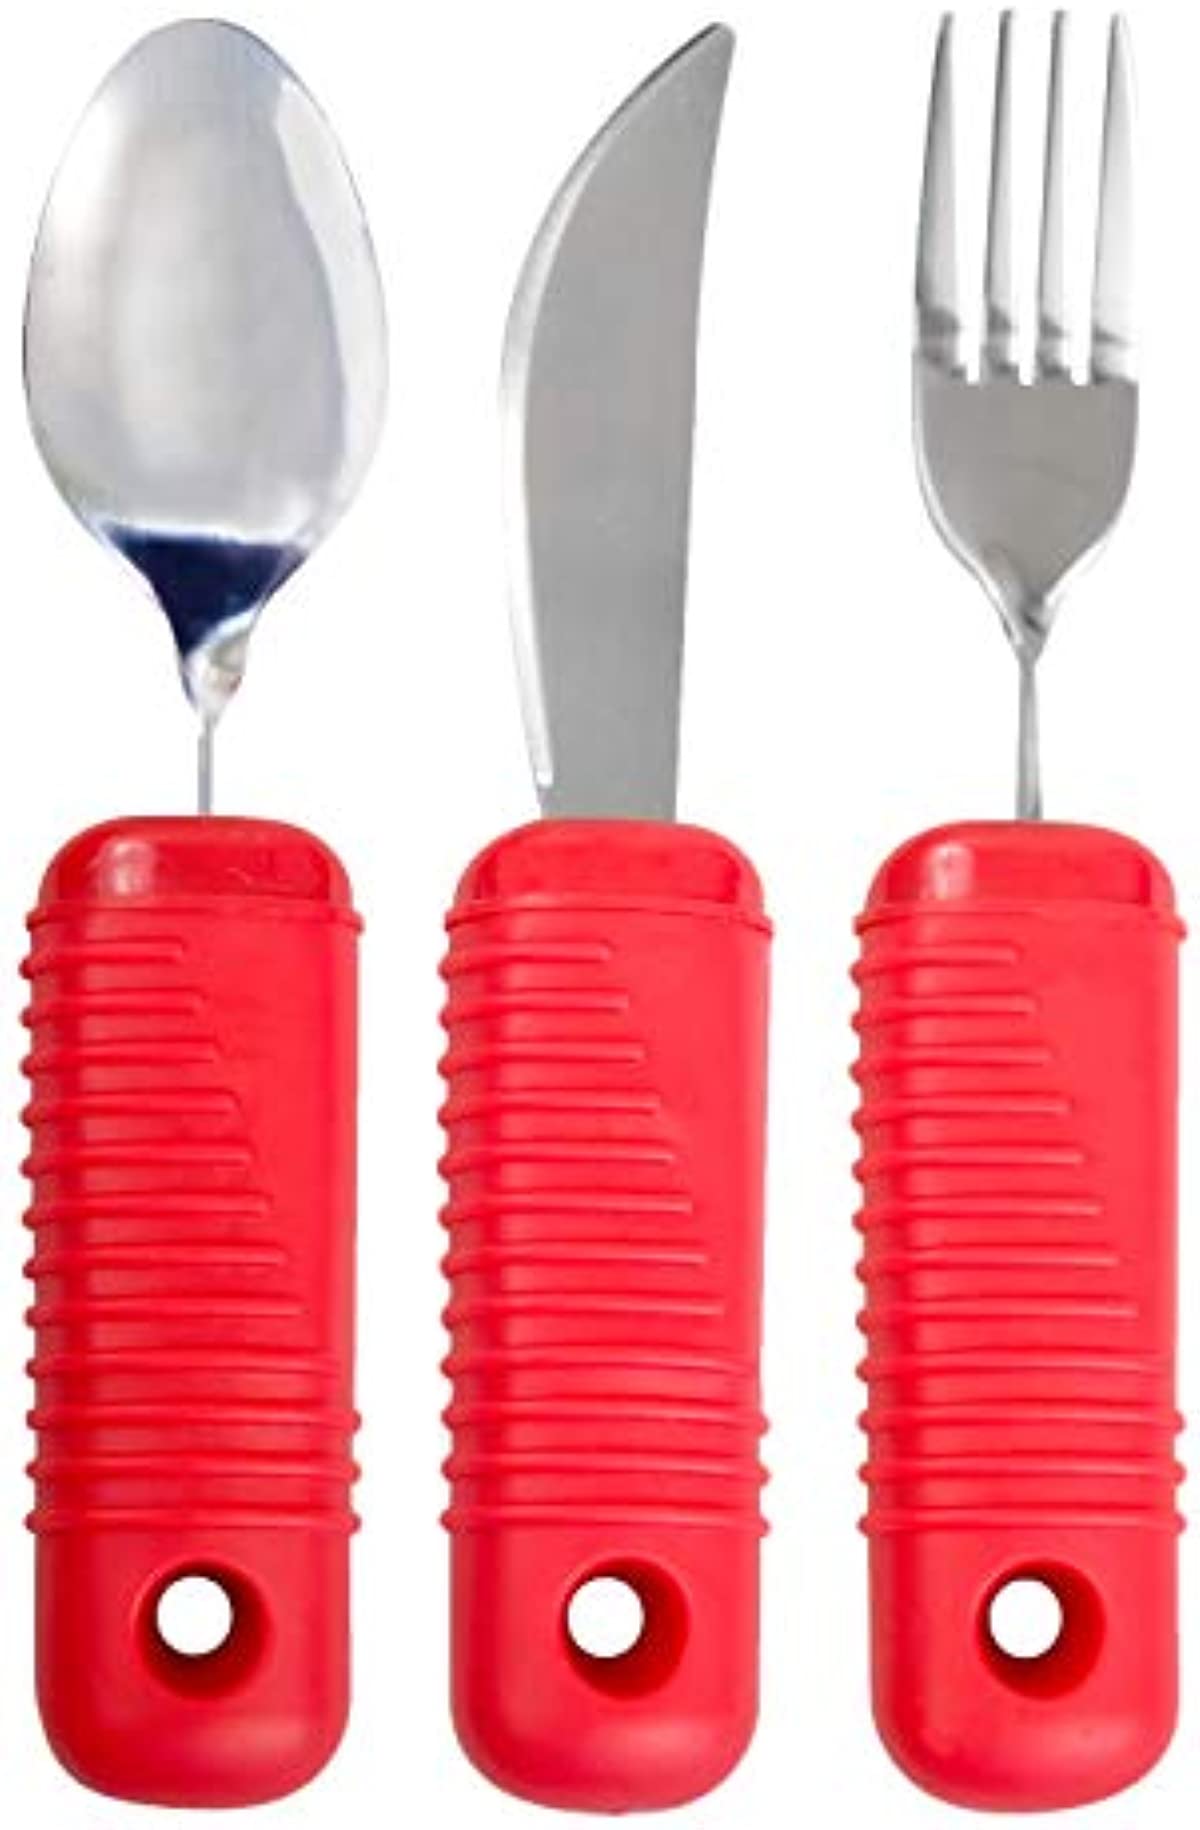 3 Piece Super Easy Grip Red Flatware Set - Bendable Built Up Large Fork, Knife, and Spoon